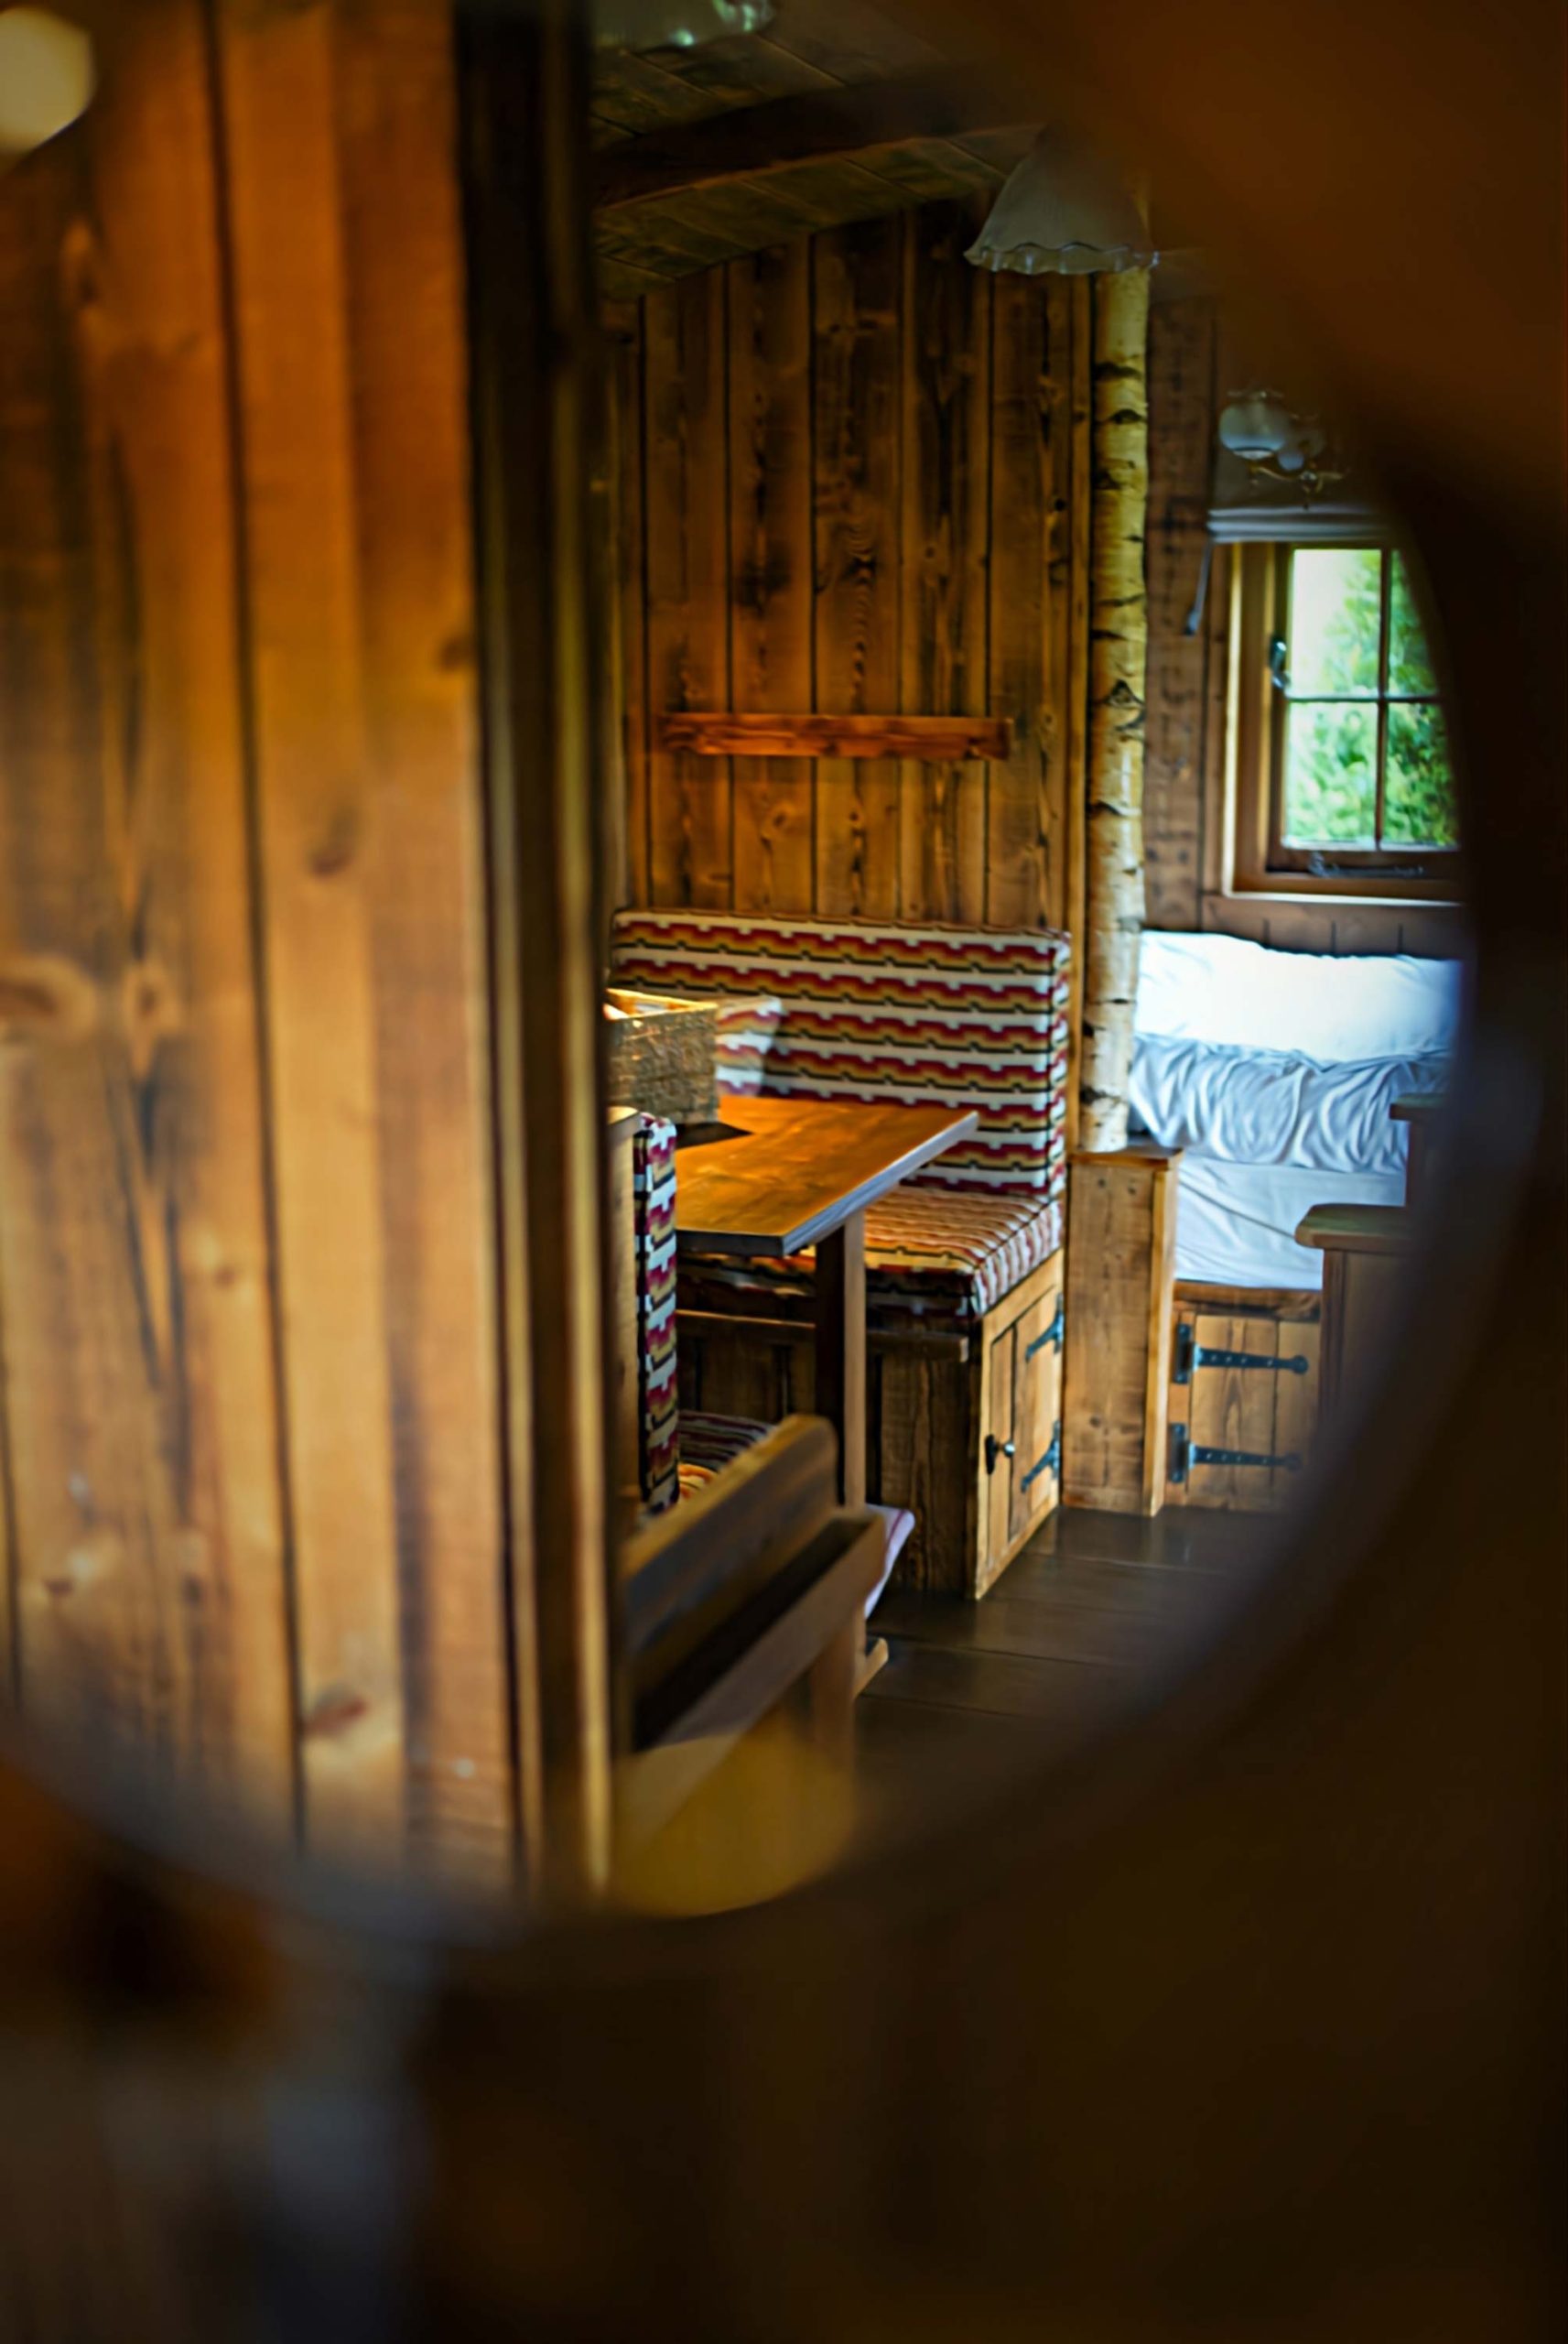 The seating area and bedroom of one of Loose Reins' cabins reflected in a mirror